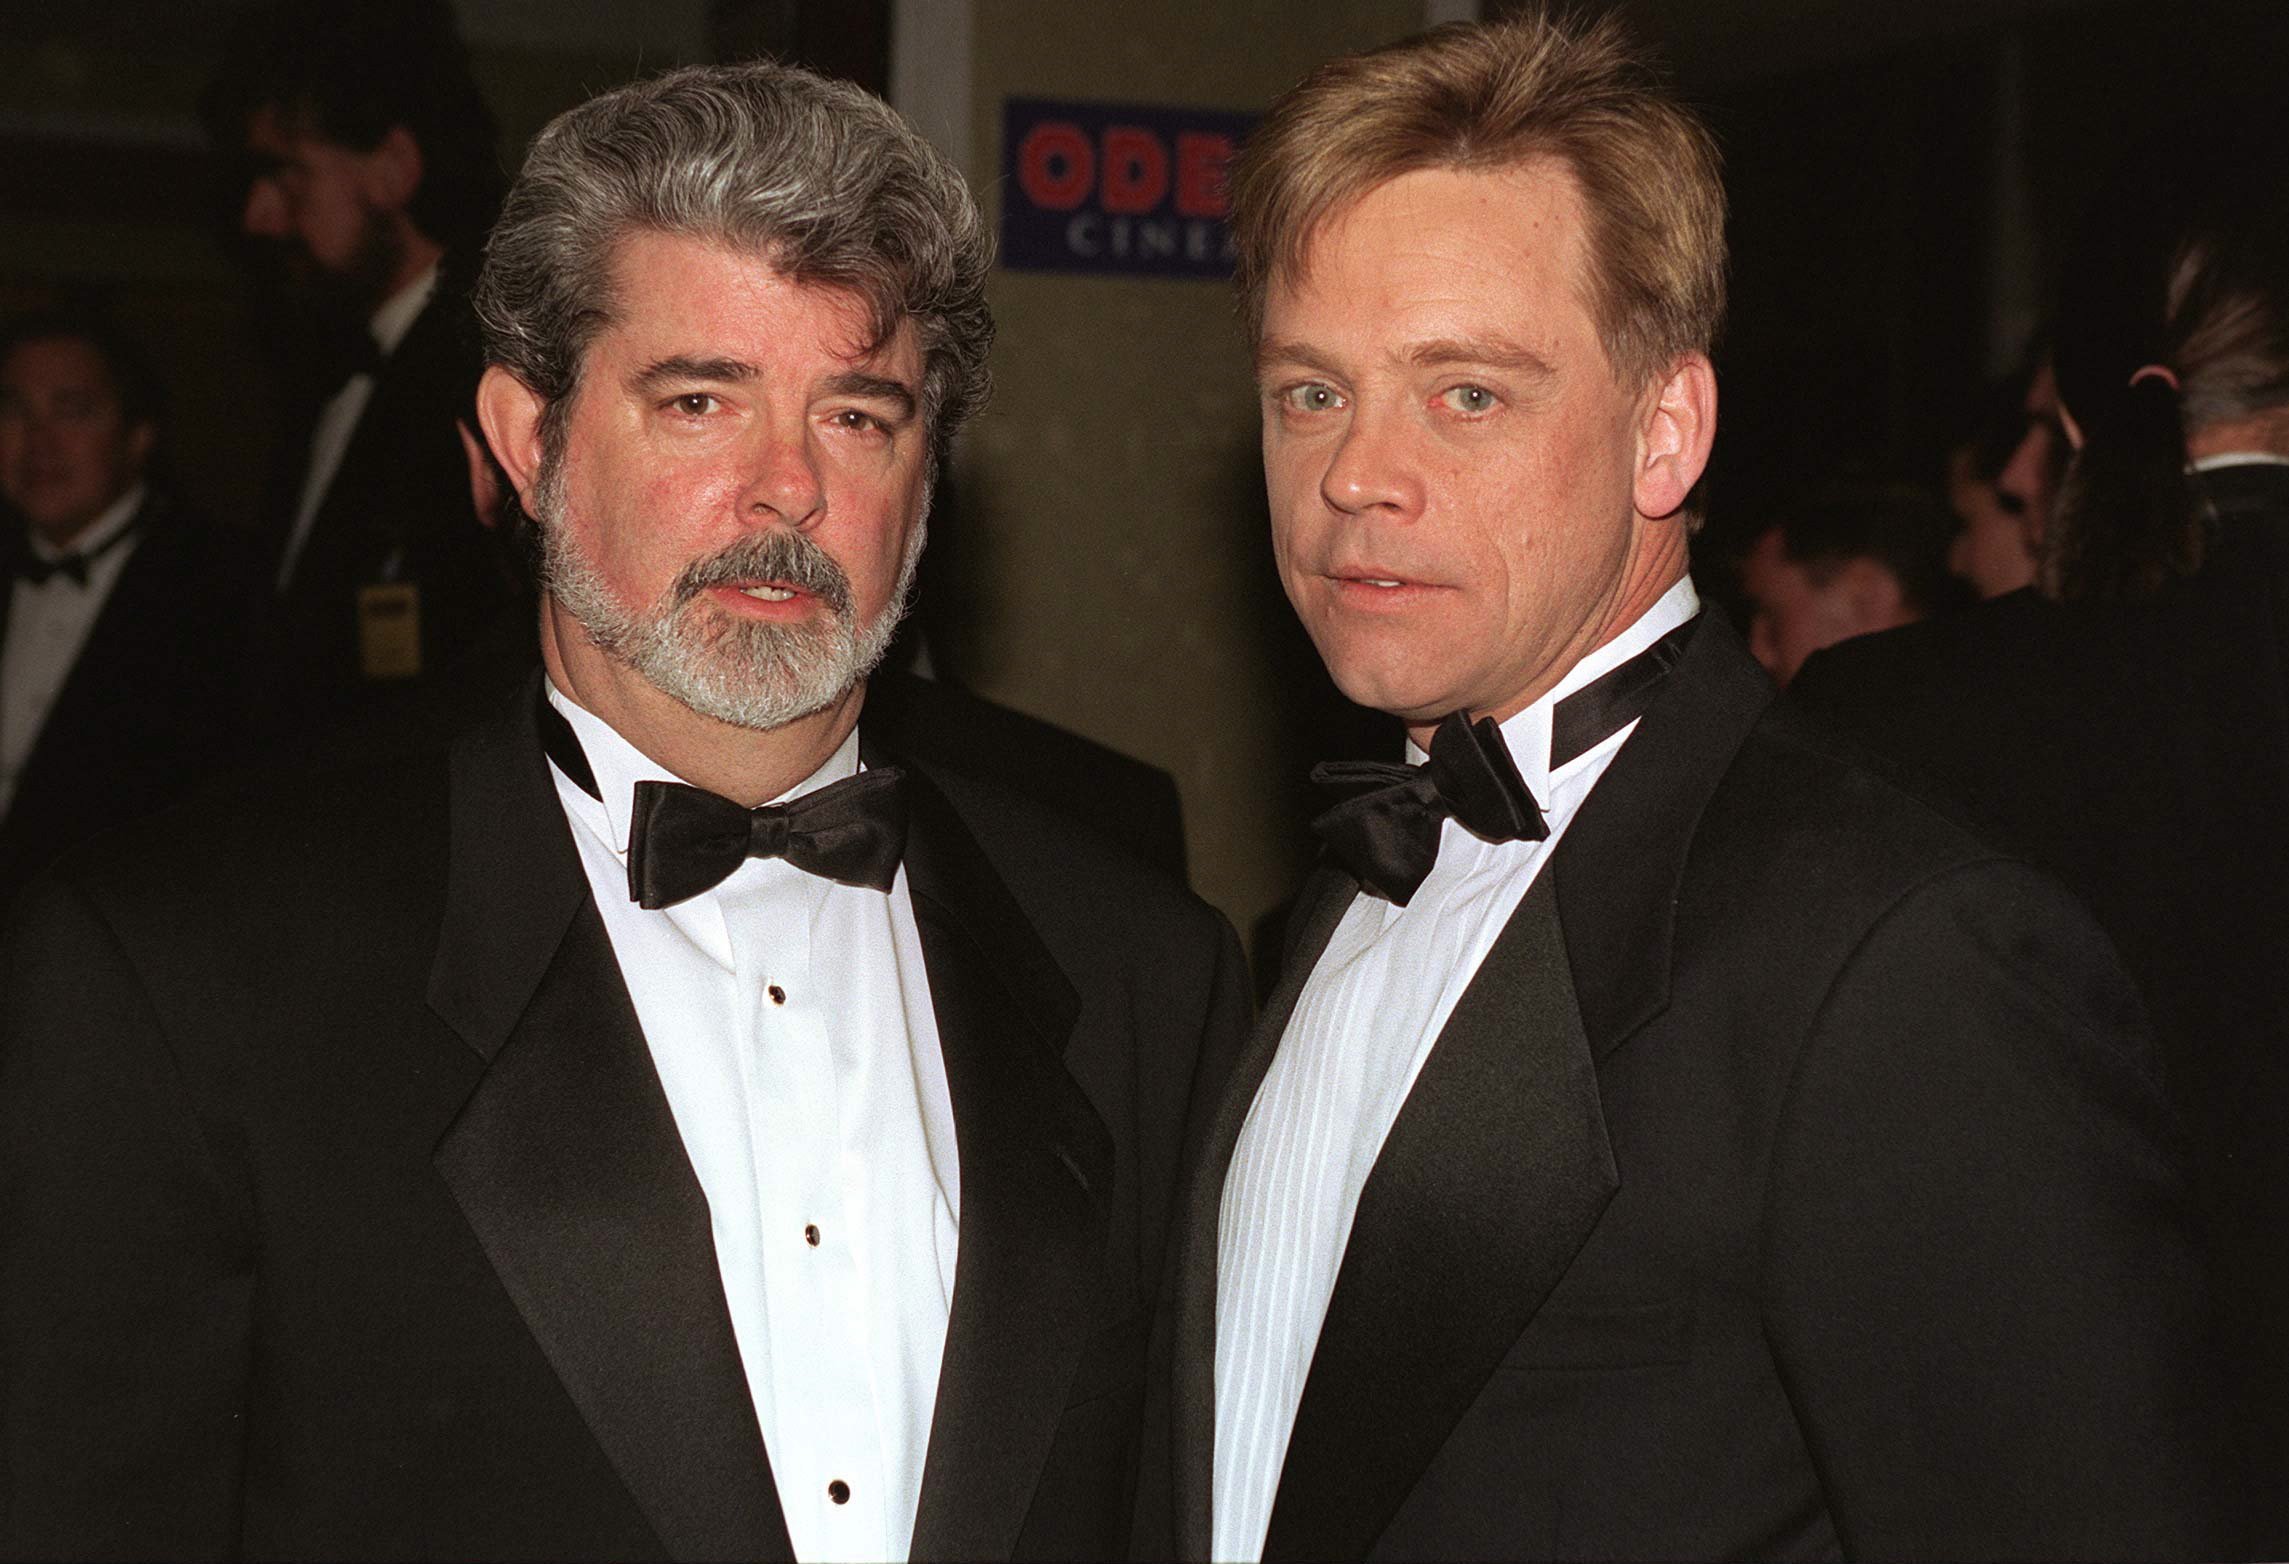 George Lucas and Mark Hamill wearing suits